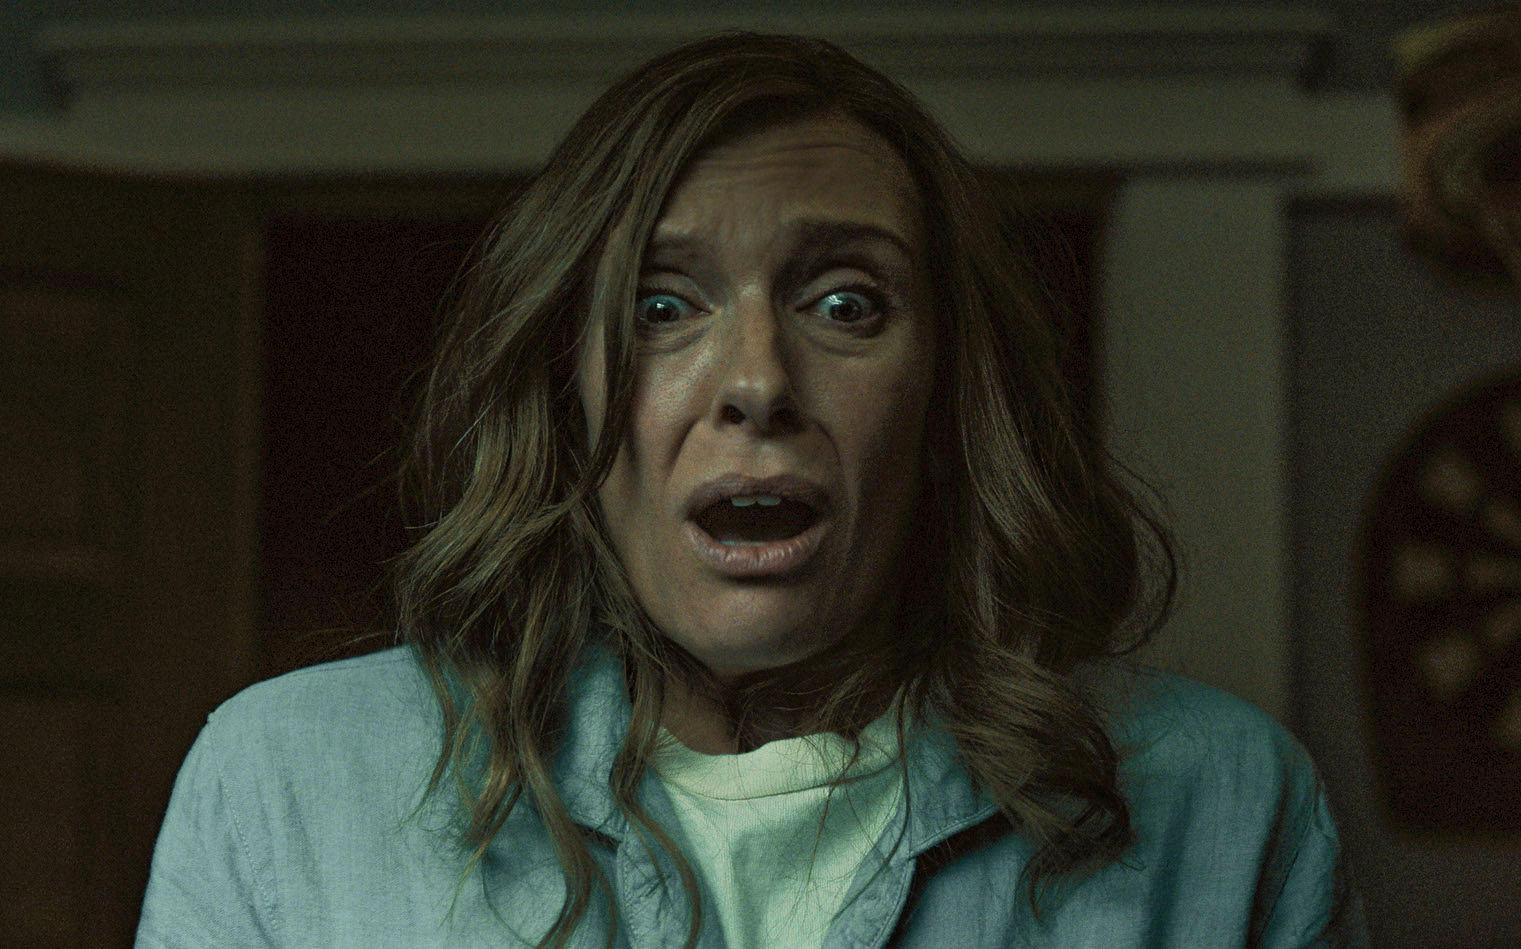 Toni Collette looking terrified in Ari Aster’s Hereditary